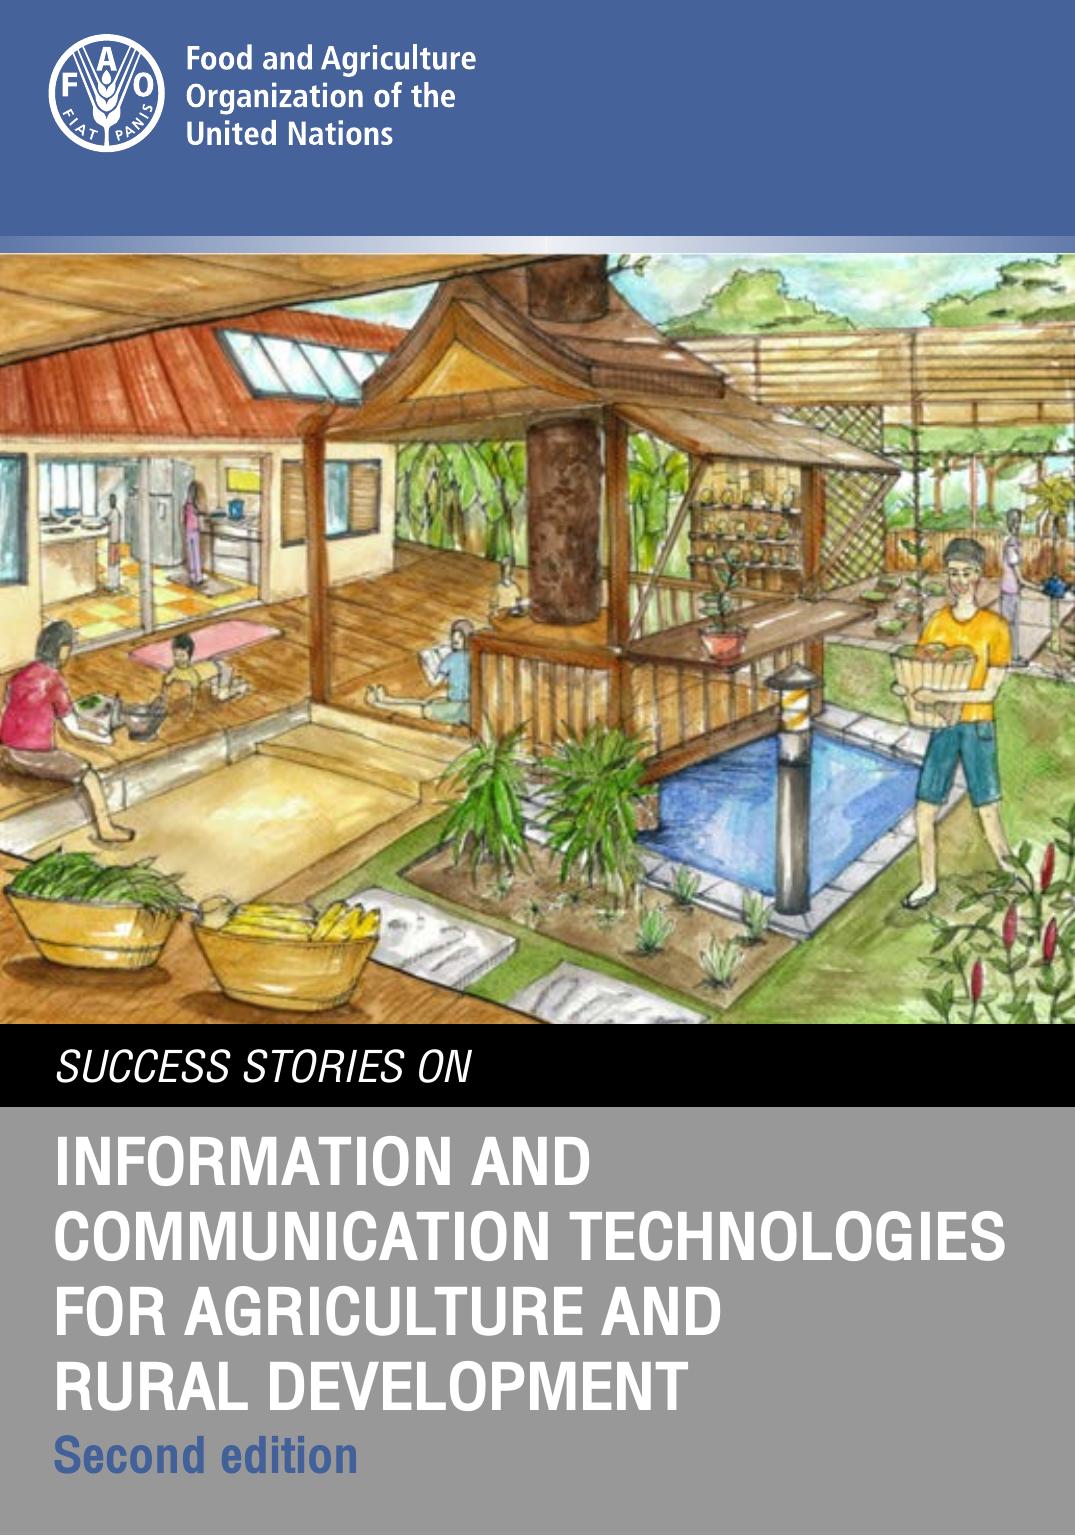 Success stories on information and communication technologies for agriculture and rural development